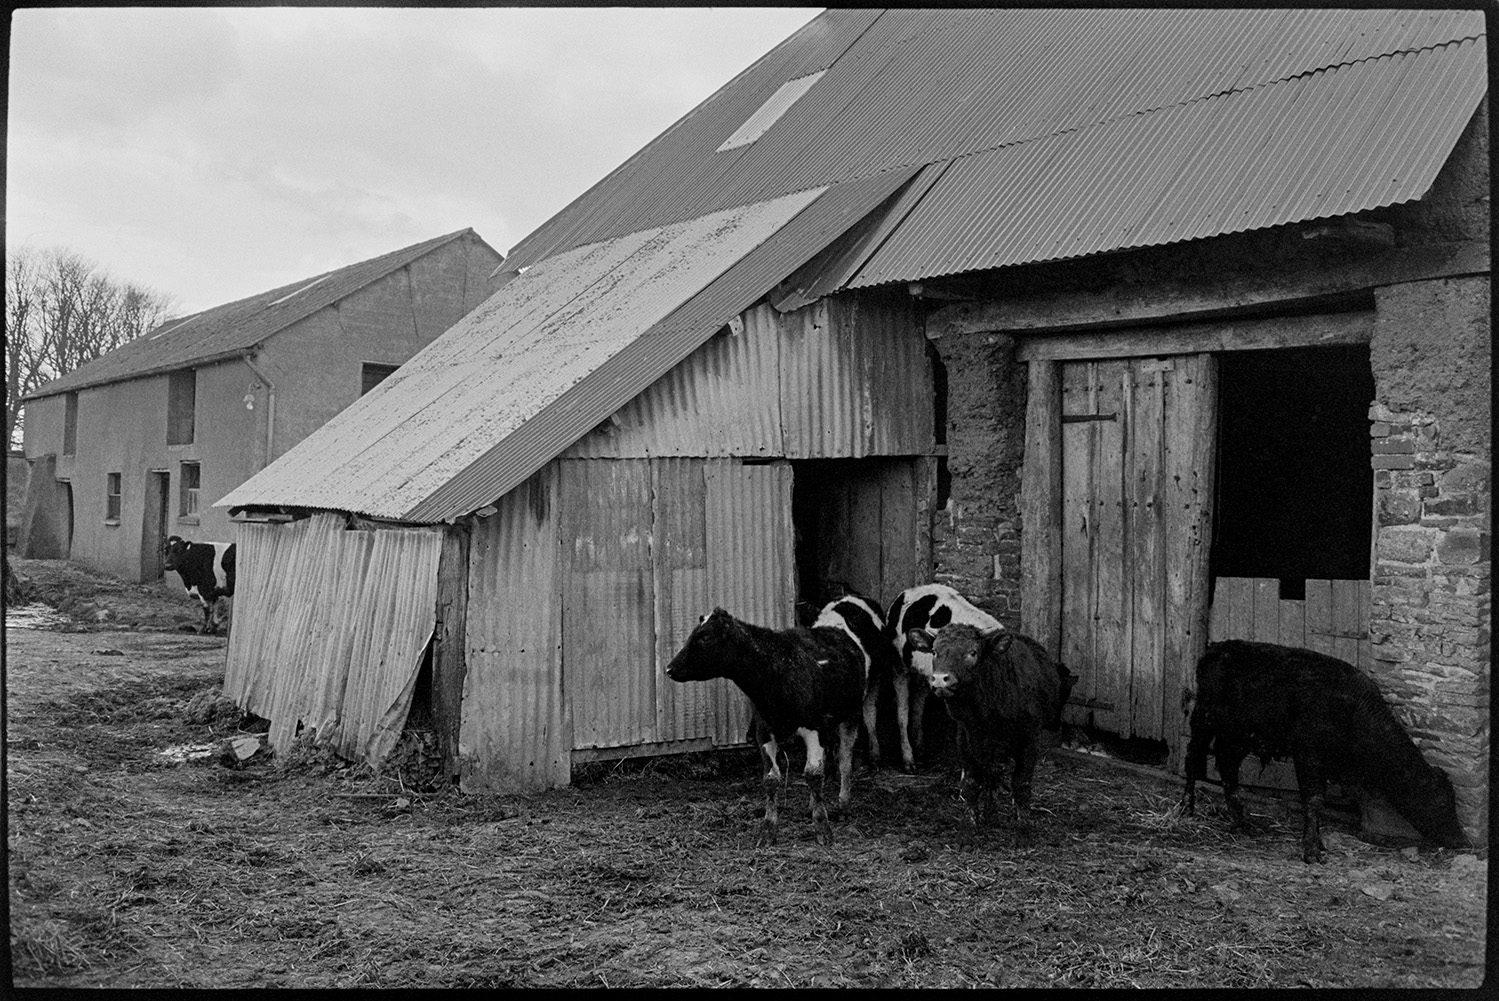 Cows, barns, woodpile. 
[Young cattle walking out of a corrugated iron shed, next to a stone and cob barn with a wooden door, into the farmyard at Parsonage, Iddesleigh.]